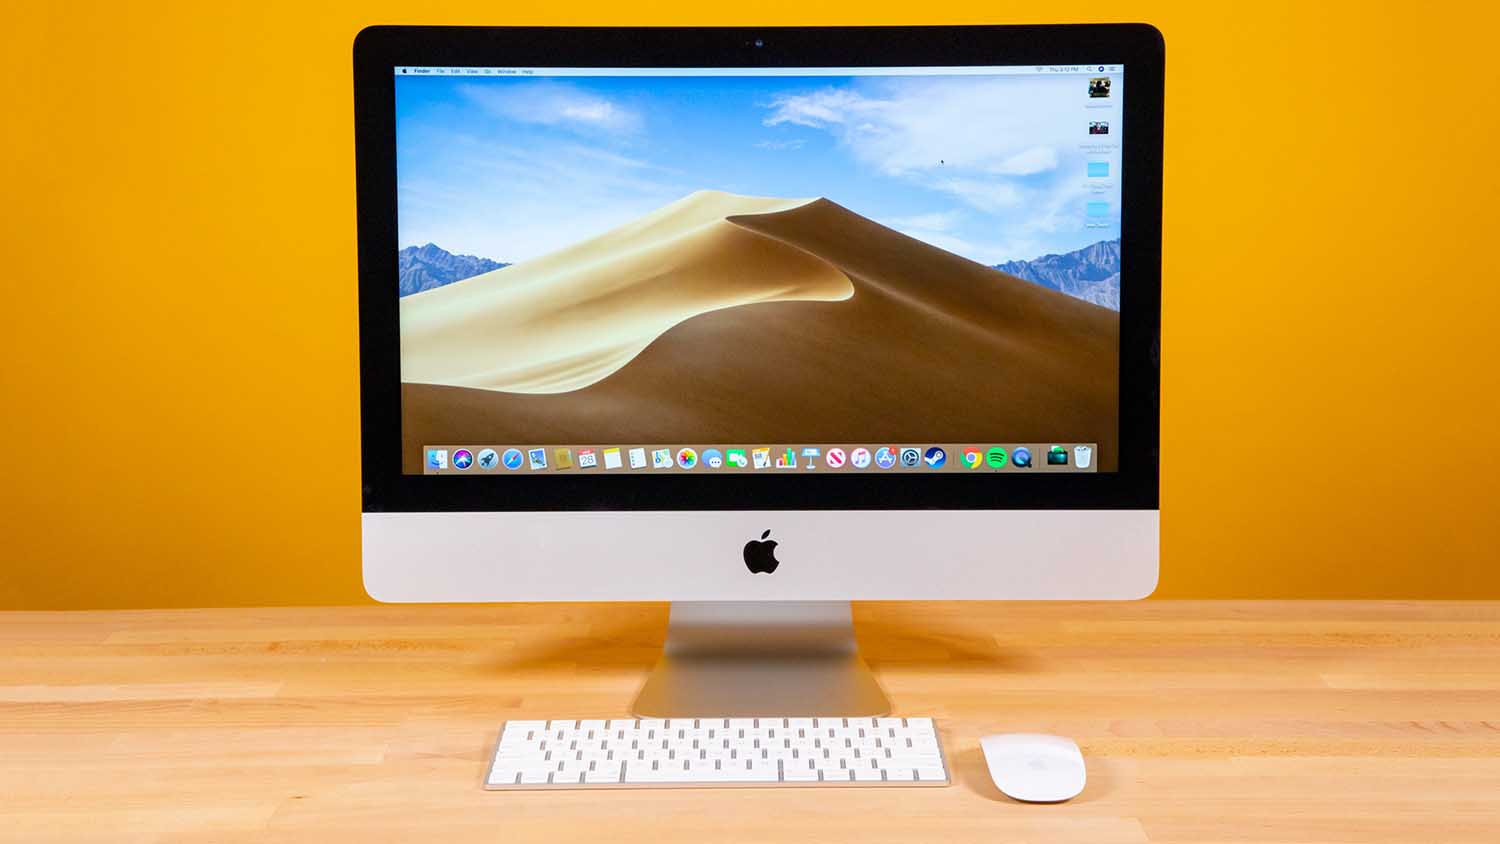 Apple iMac 21.5-inch (2019) - Full Review and Benchmarks | Tom's Guide